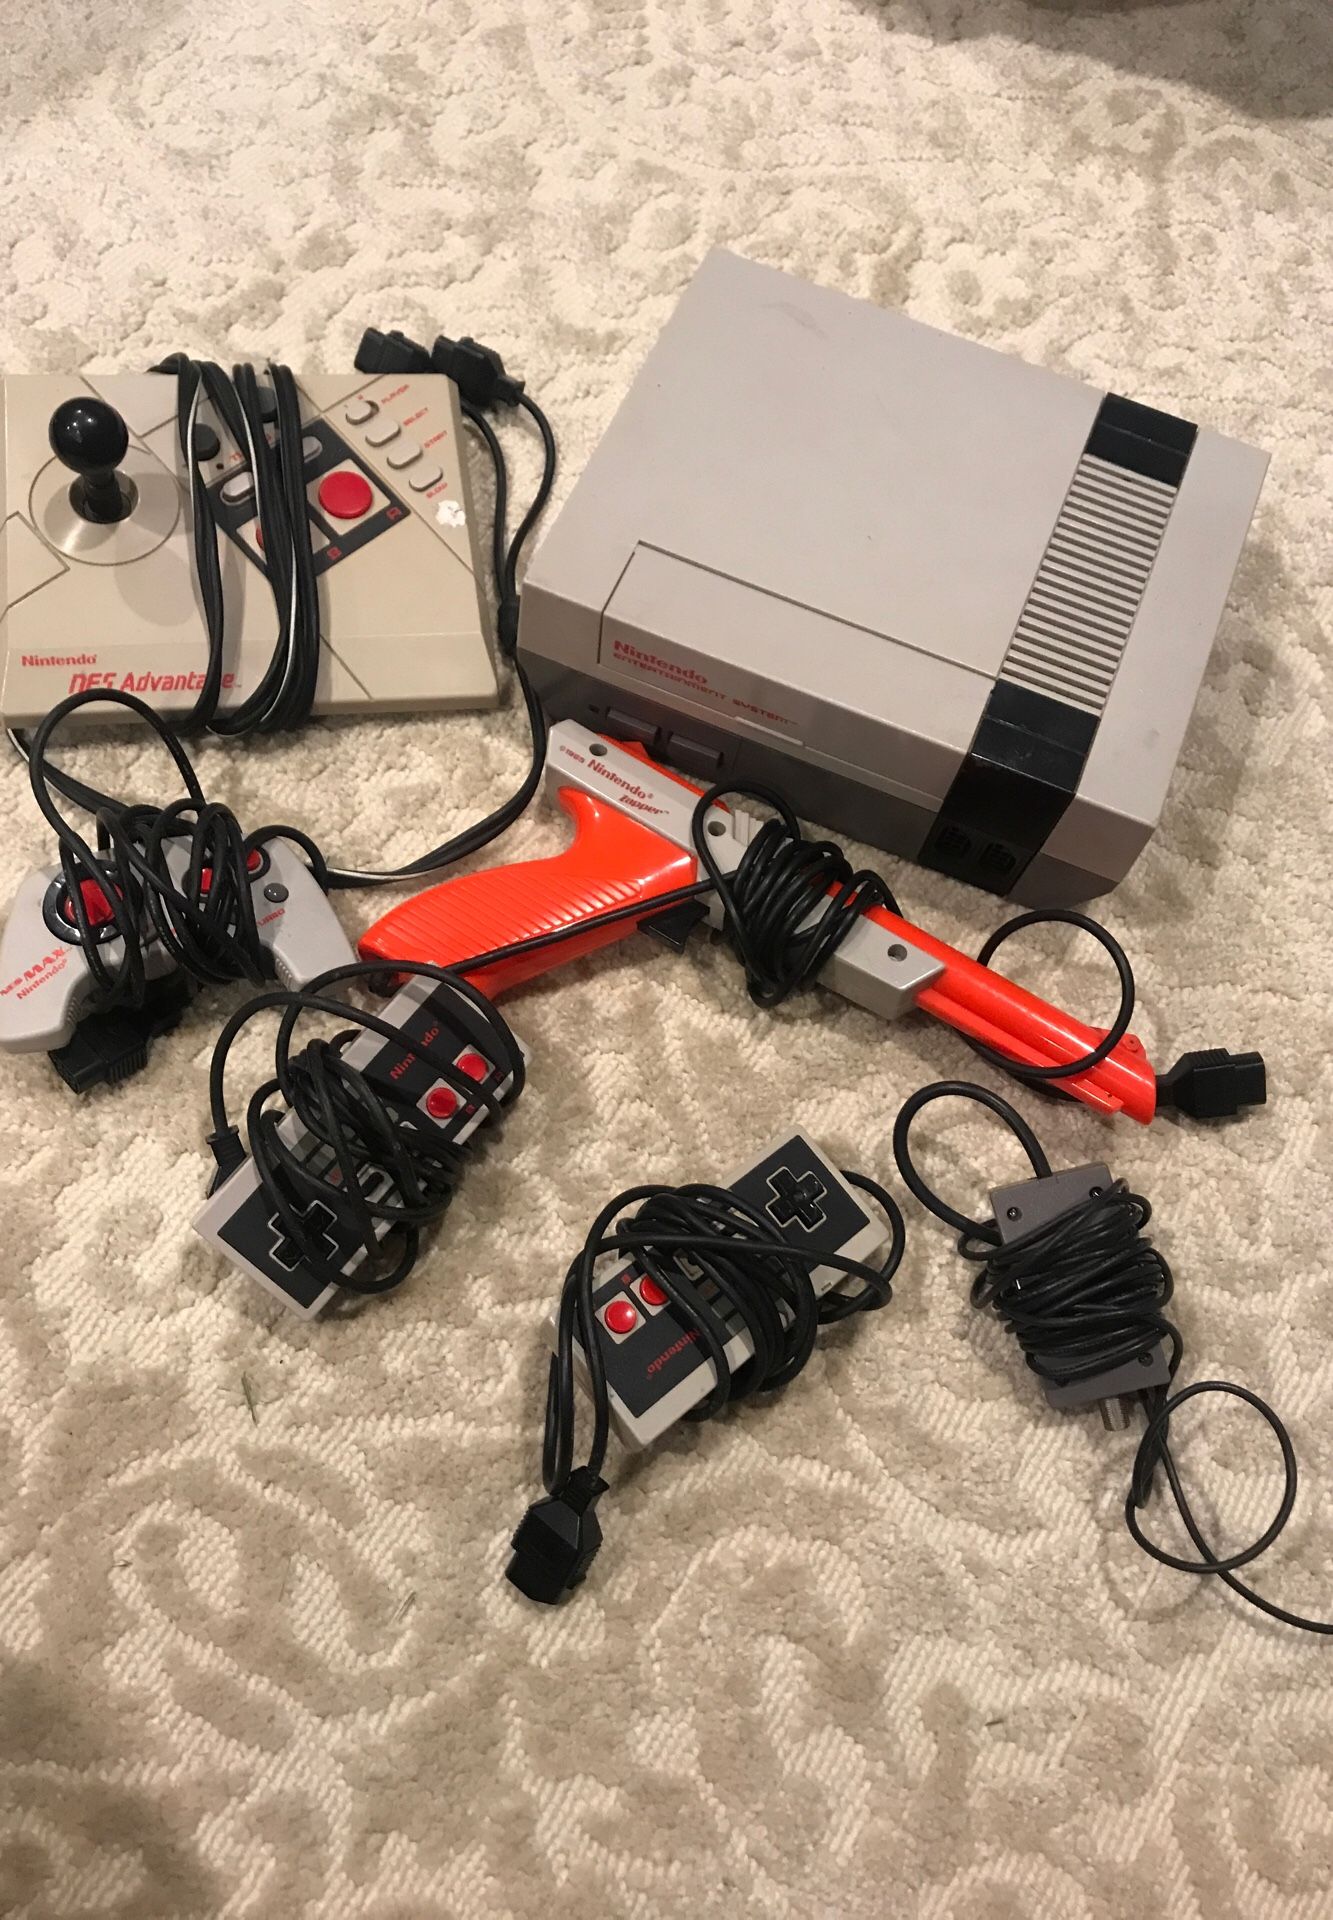 Vintage Nintendo NES, controllers, gun and more